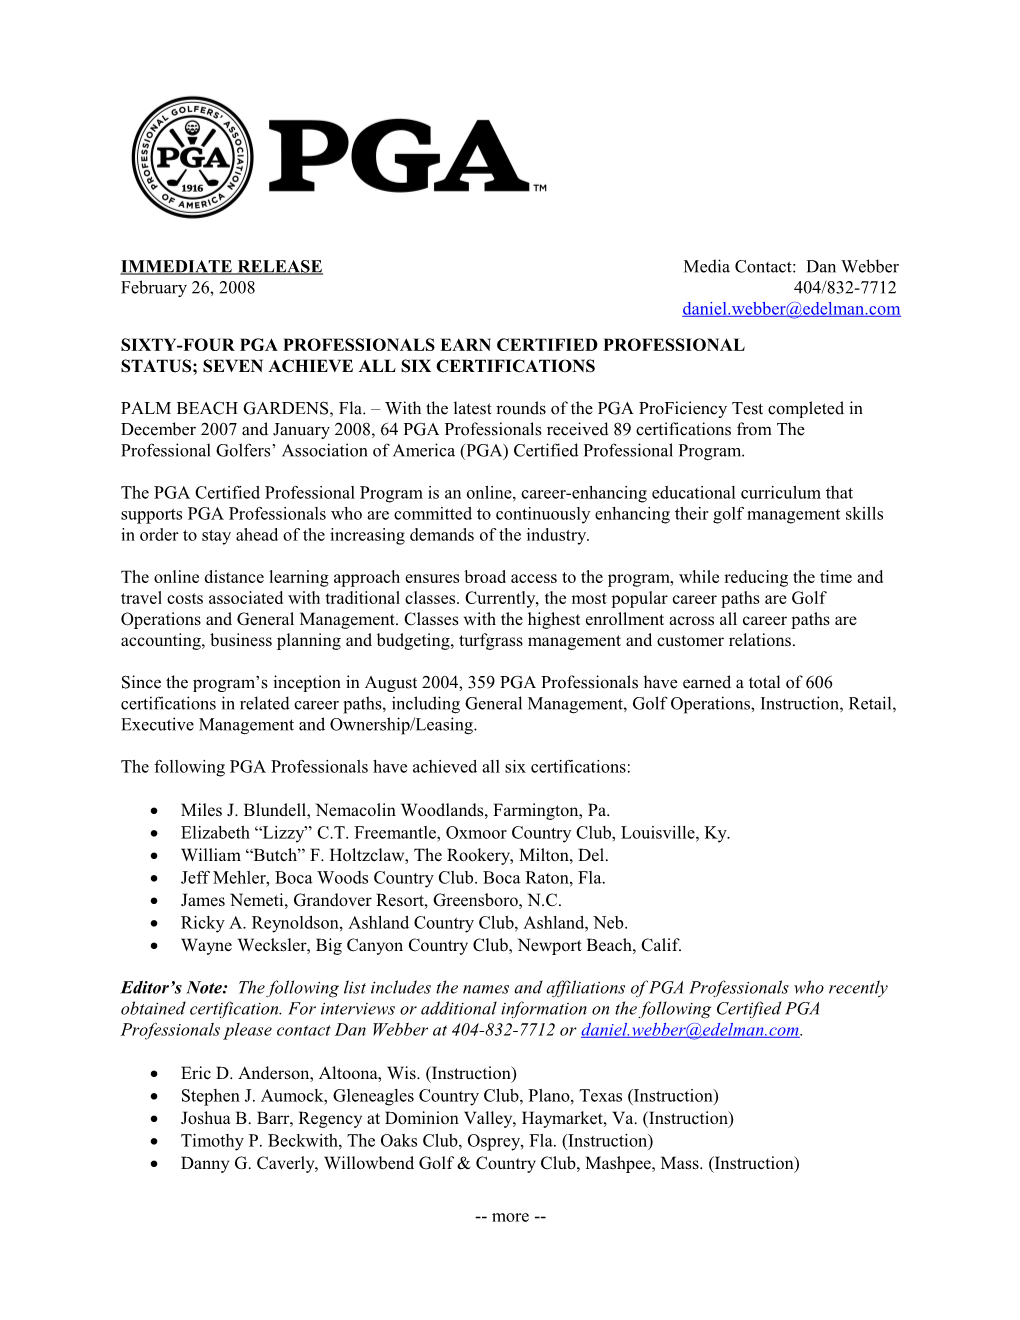 The PGA Of America Announces The First Professionals To Satisfy The Requirements For Certification Through The PGA Certified P